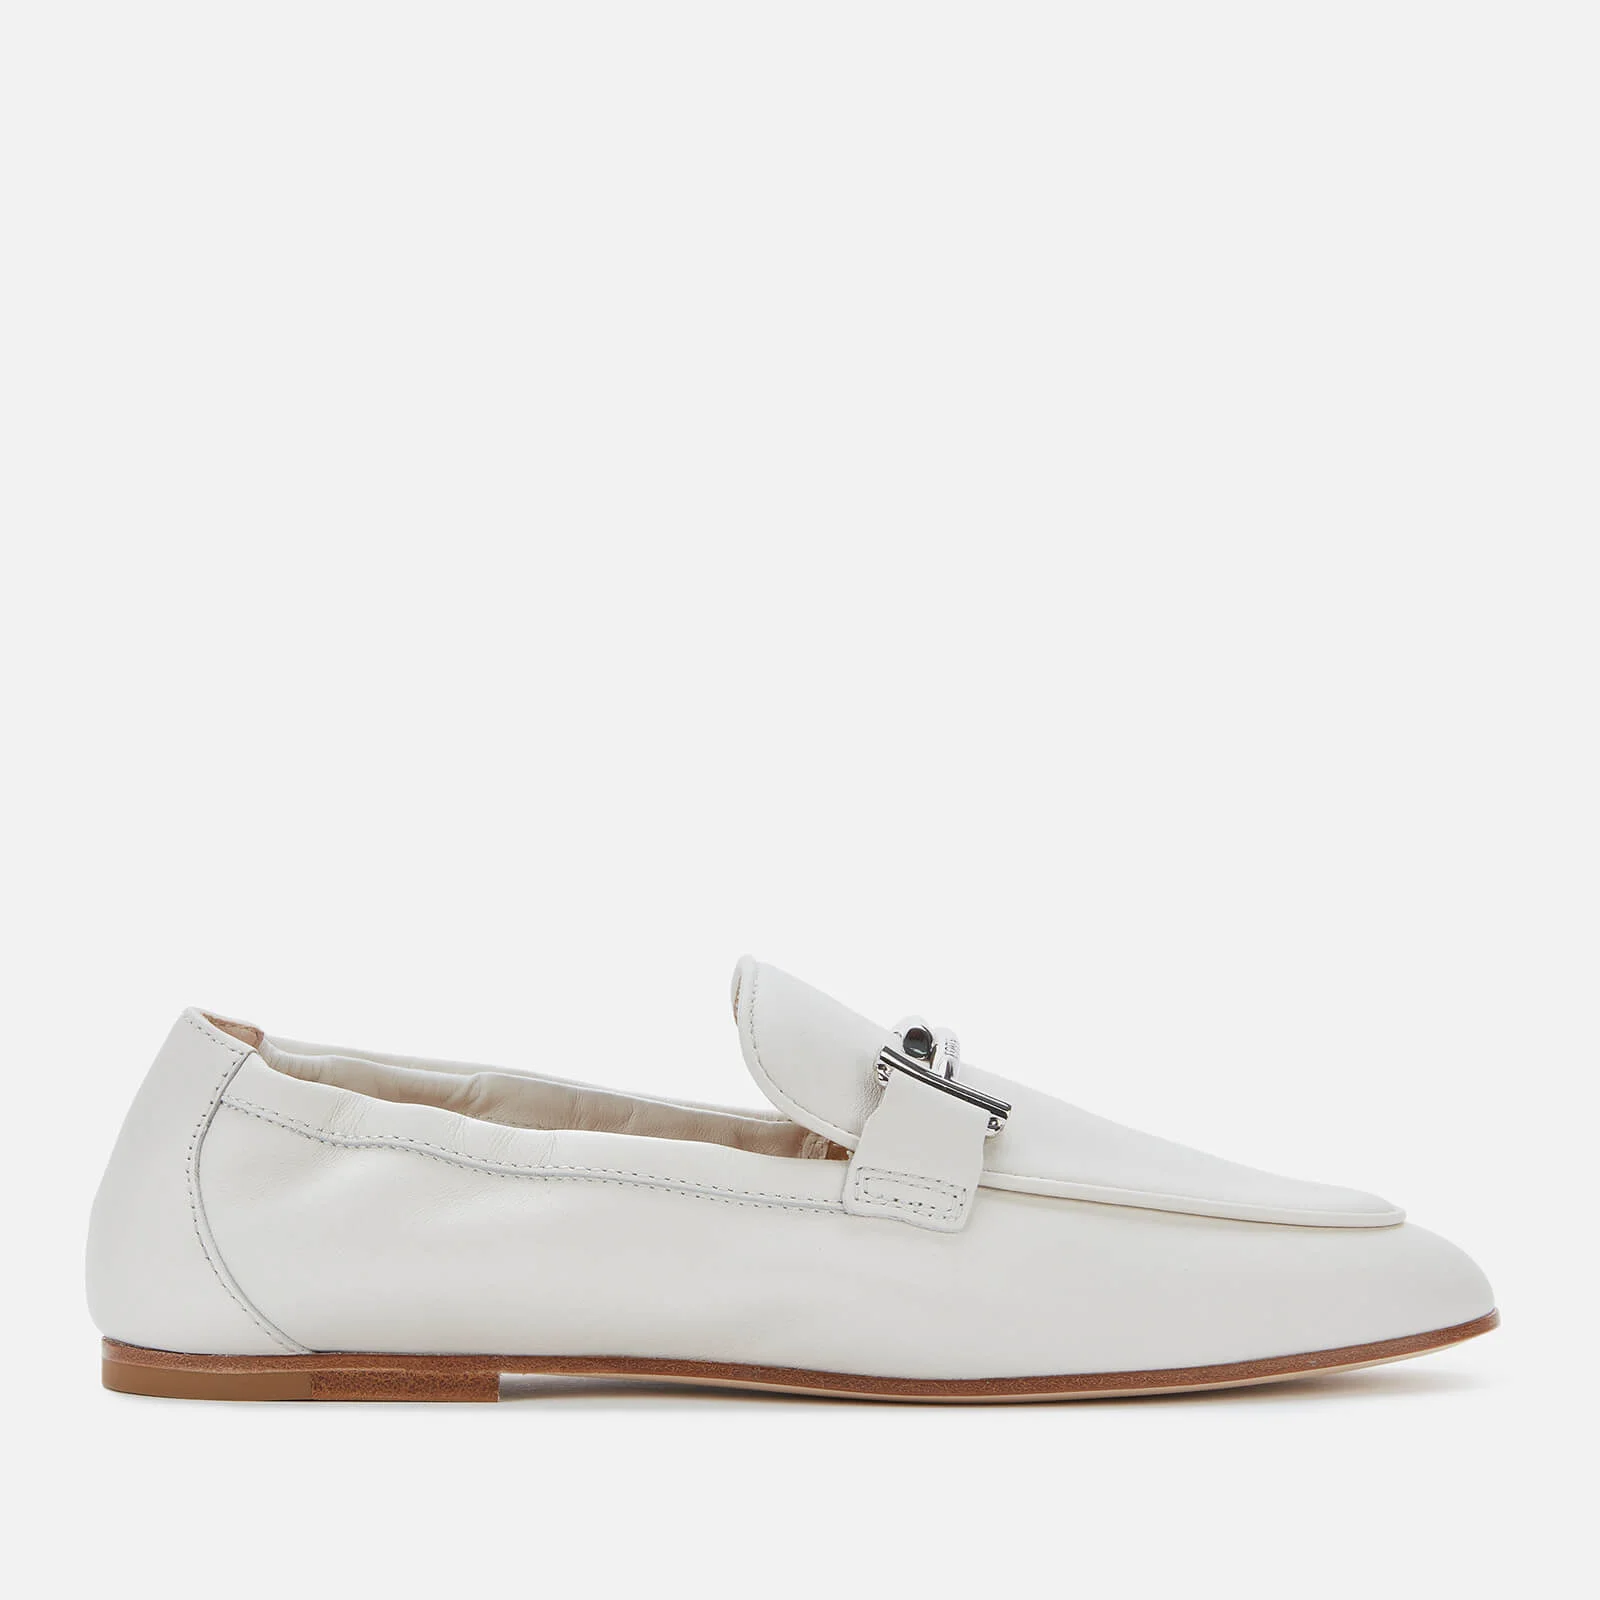 Tod's Women's Leather Loafers - White Image 1